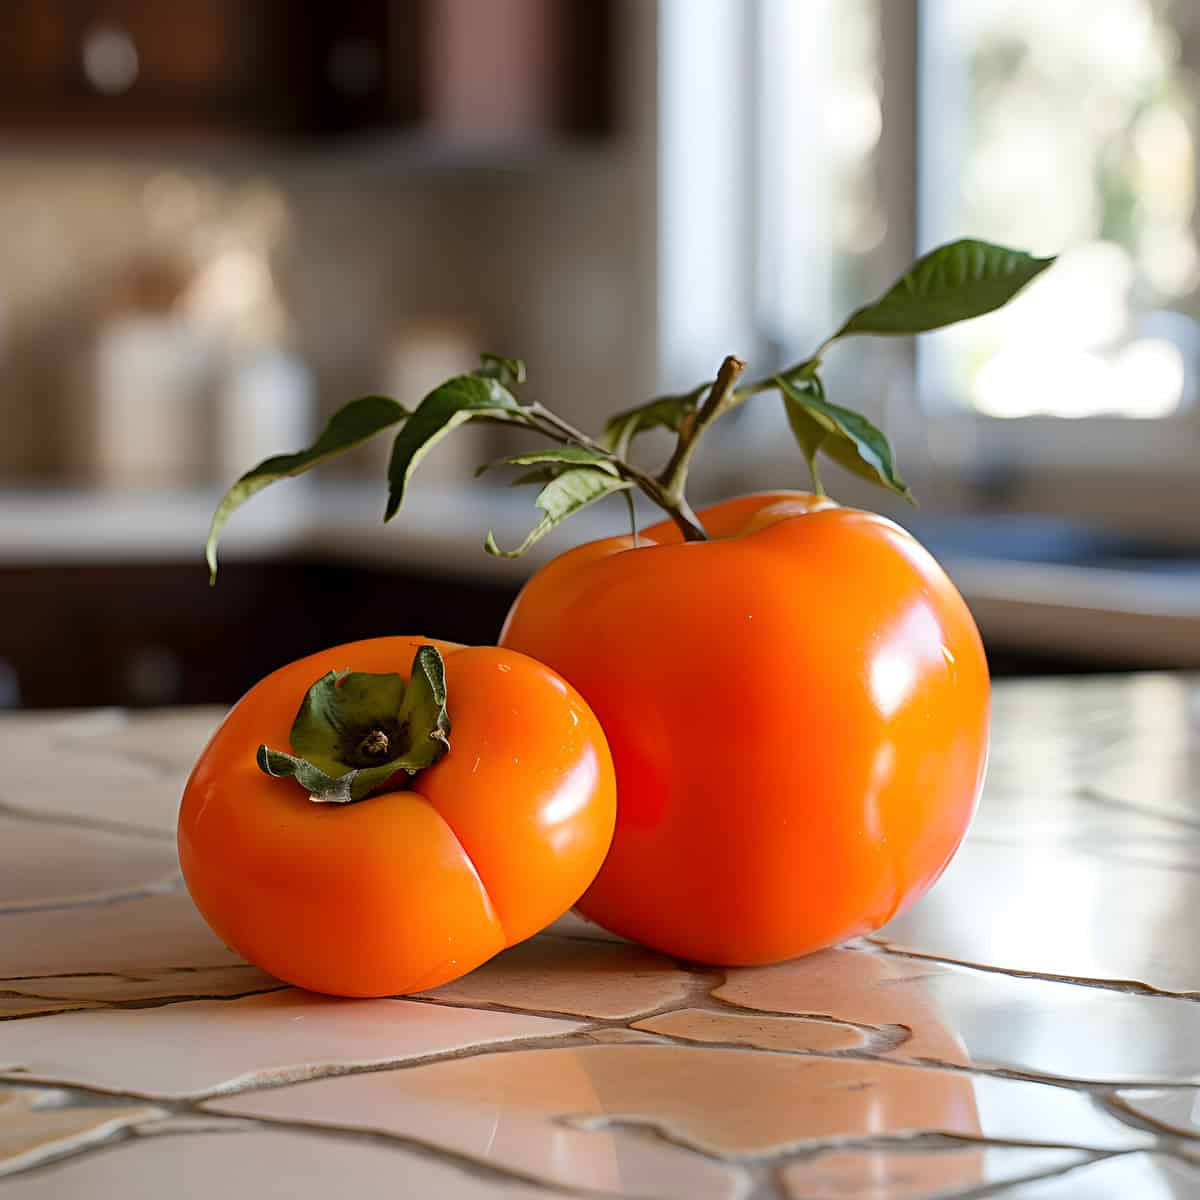 Texas Persimmon on a kitchen counter